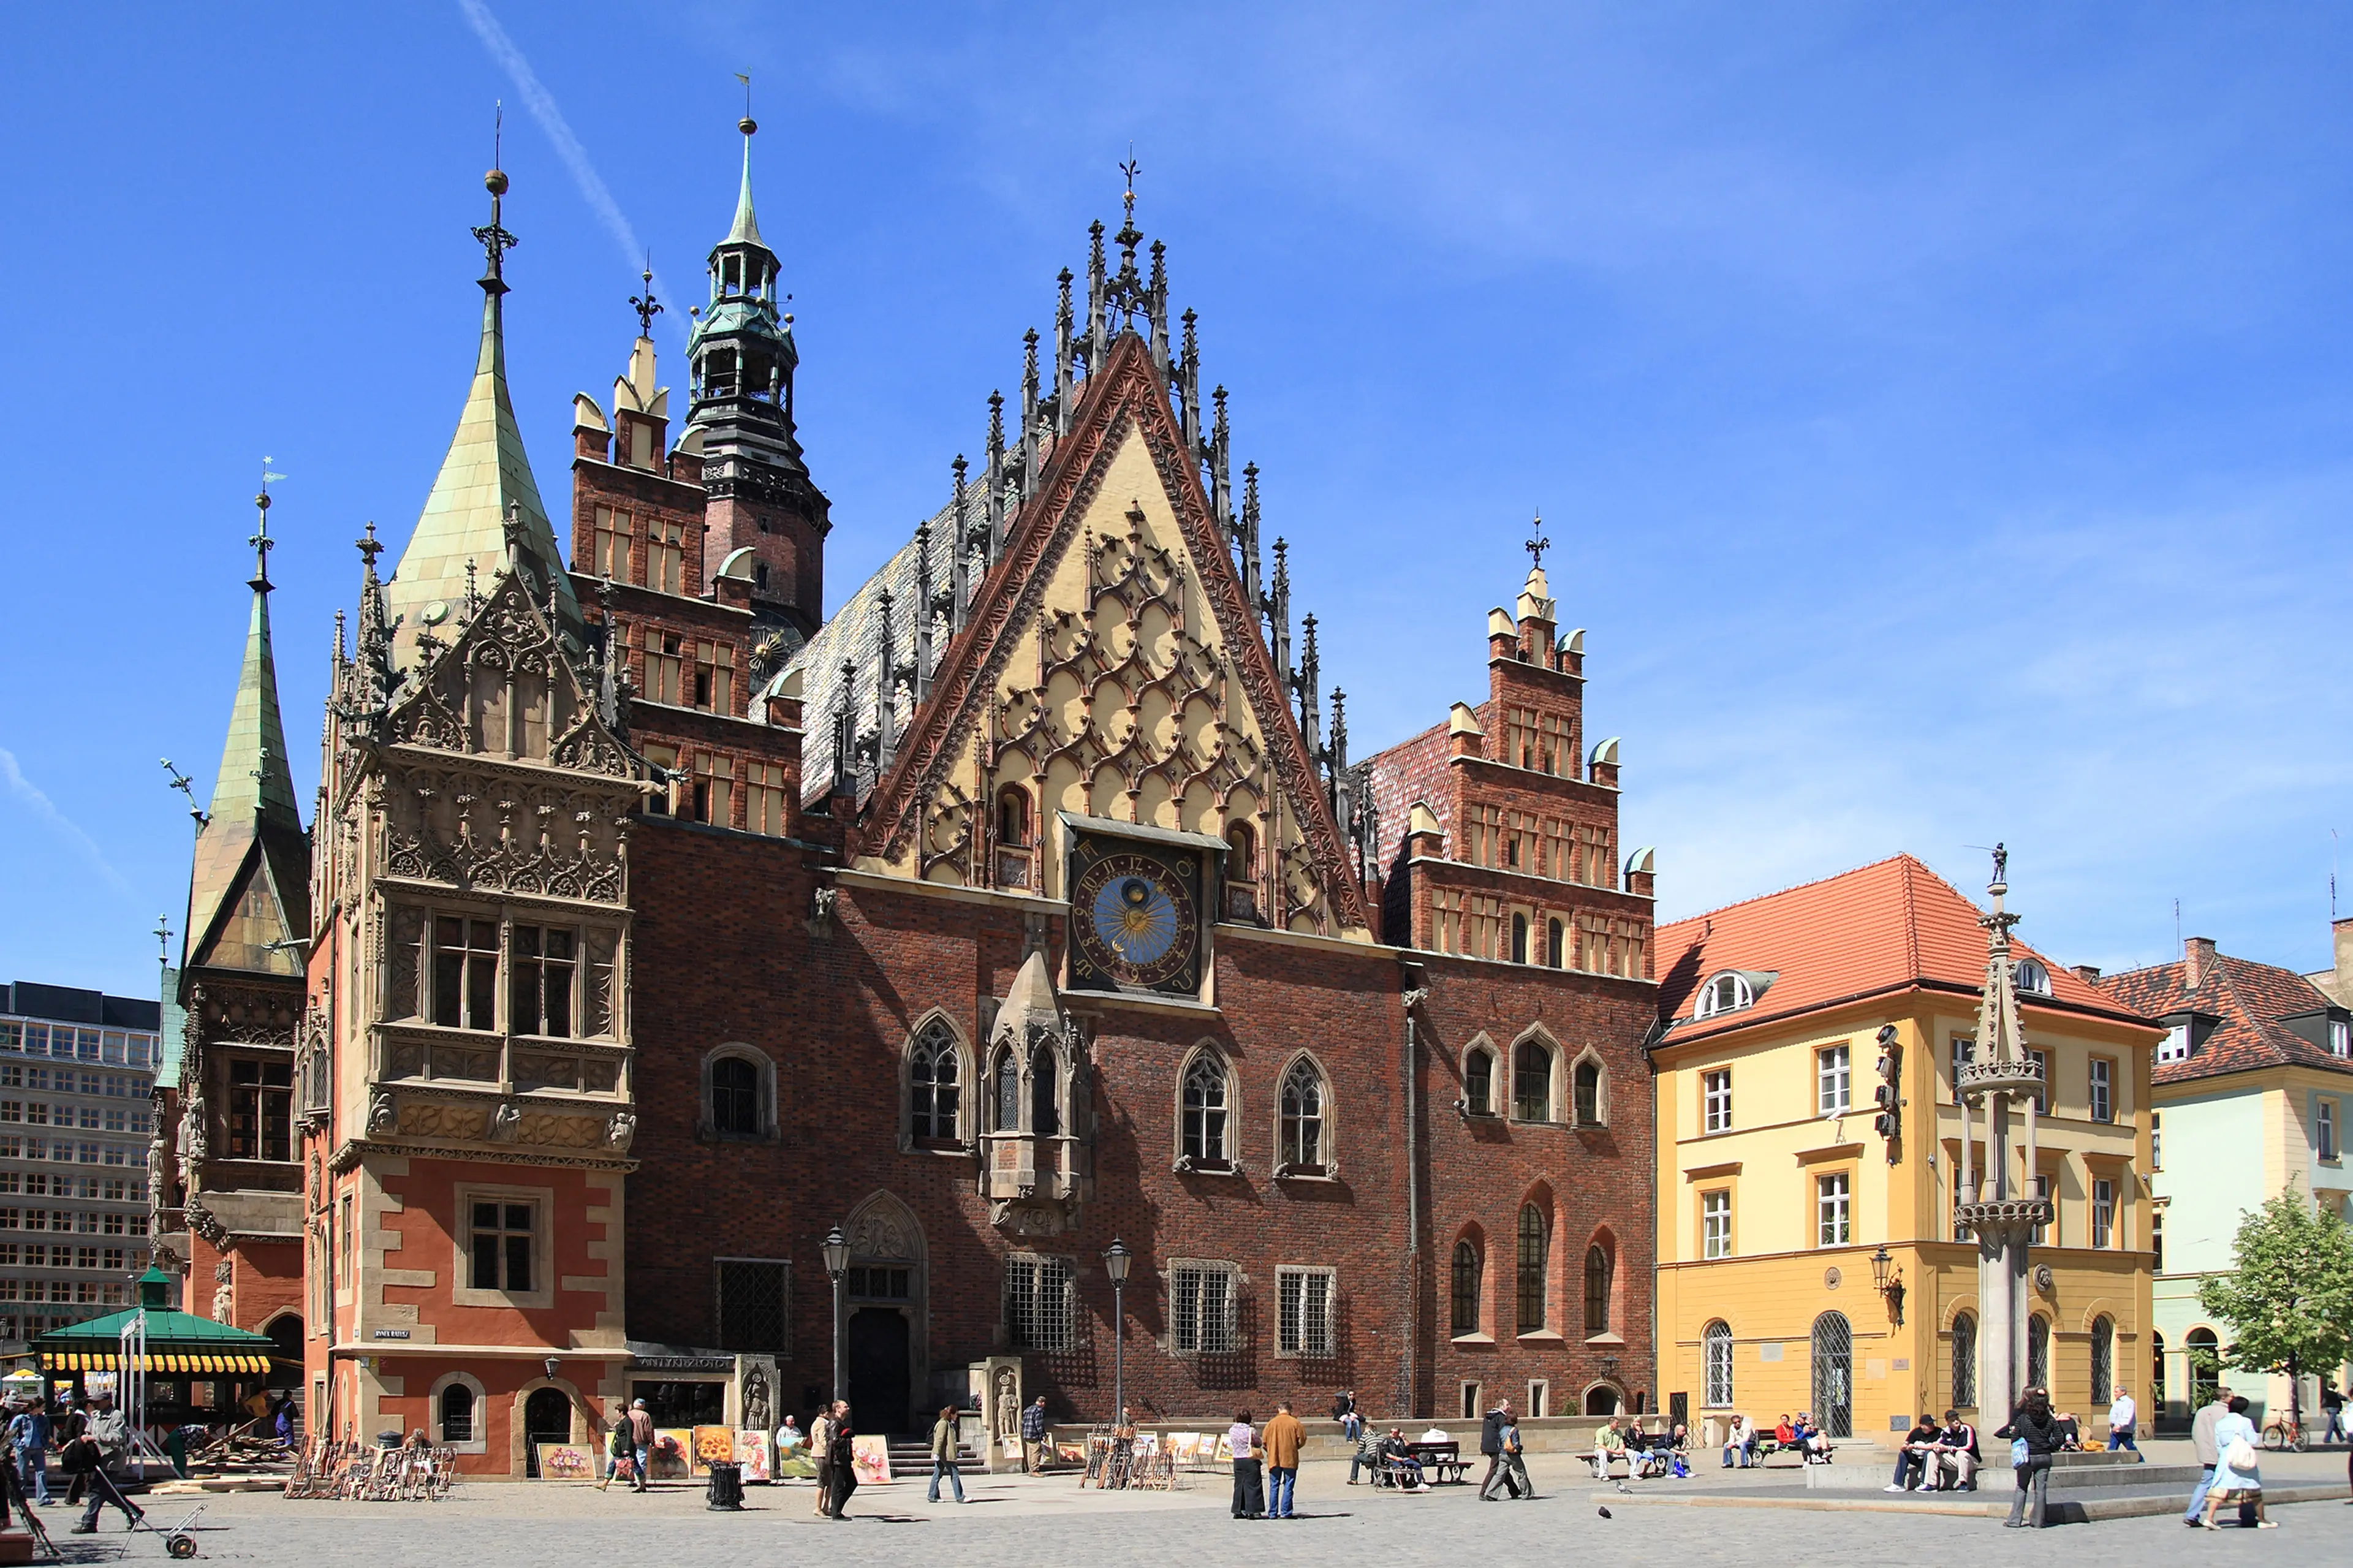 3-Day Local Food, Wine and Shopping Experience in Wroclaw